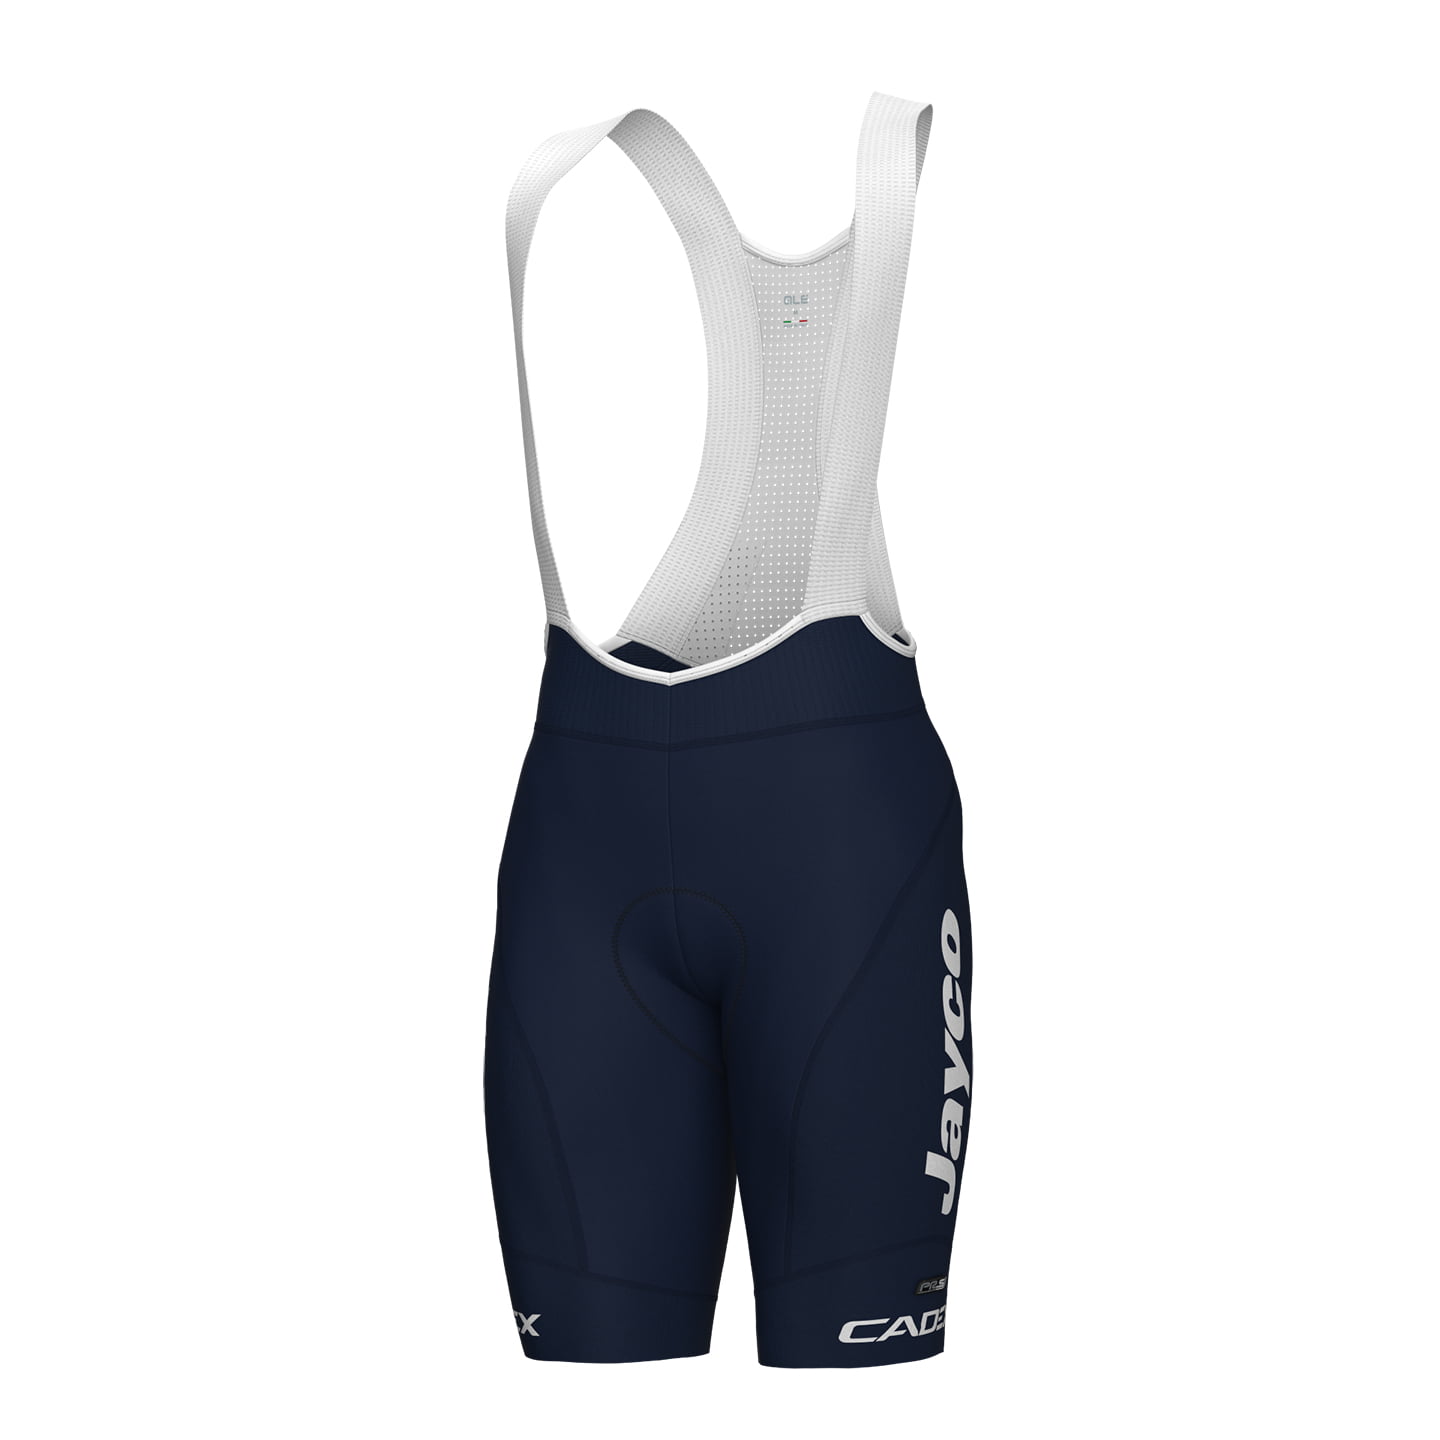 TEAM JAYCO-ALULA Race 2024 Bib Shorts, for men, size 2XL, Cycle trousers, Cycle gear